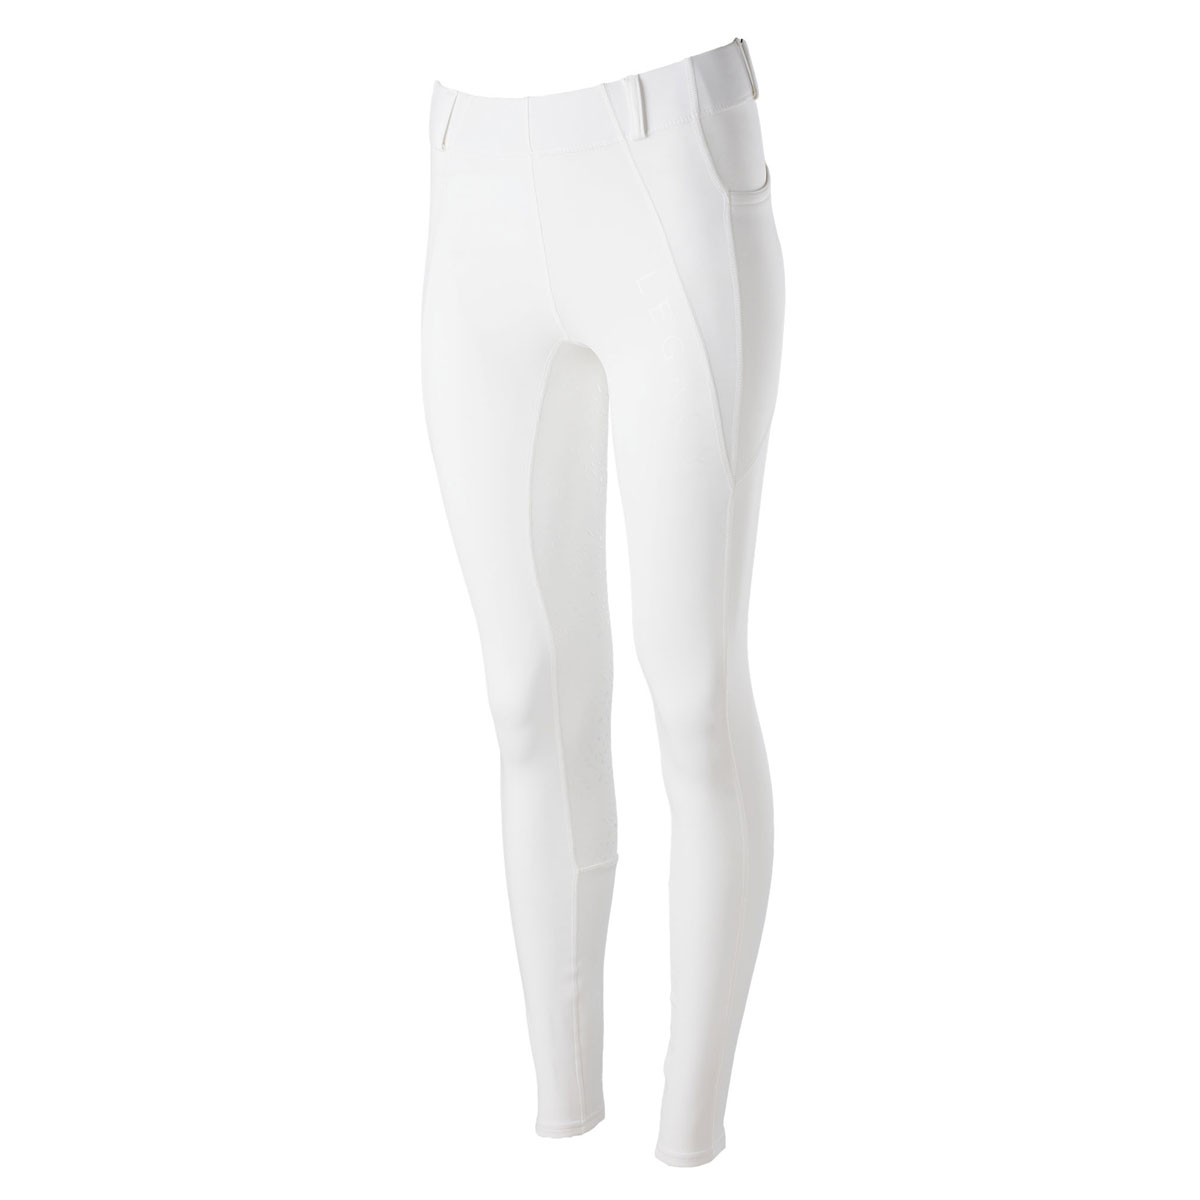 Legacy Kids Riding Tights - White - Longsight Stables & Tack Shop